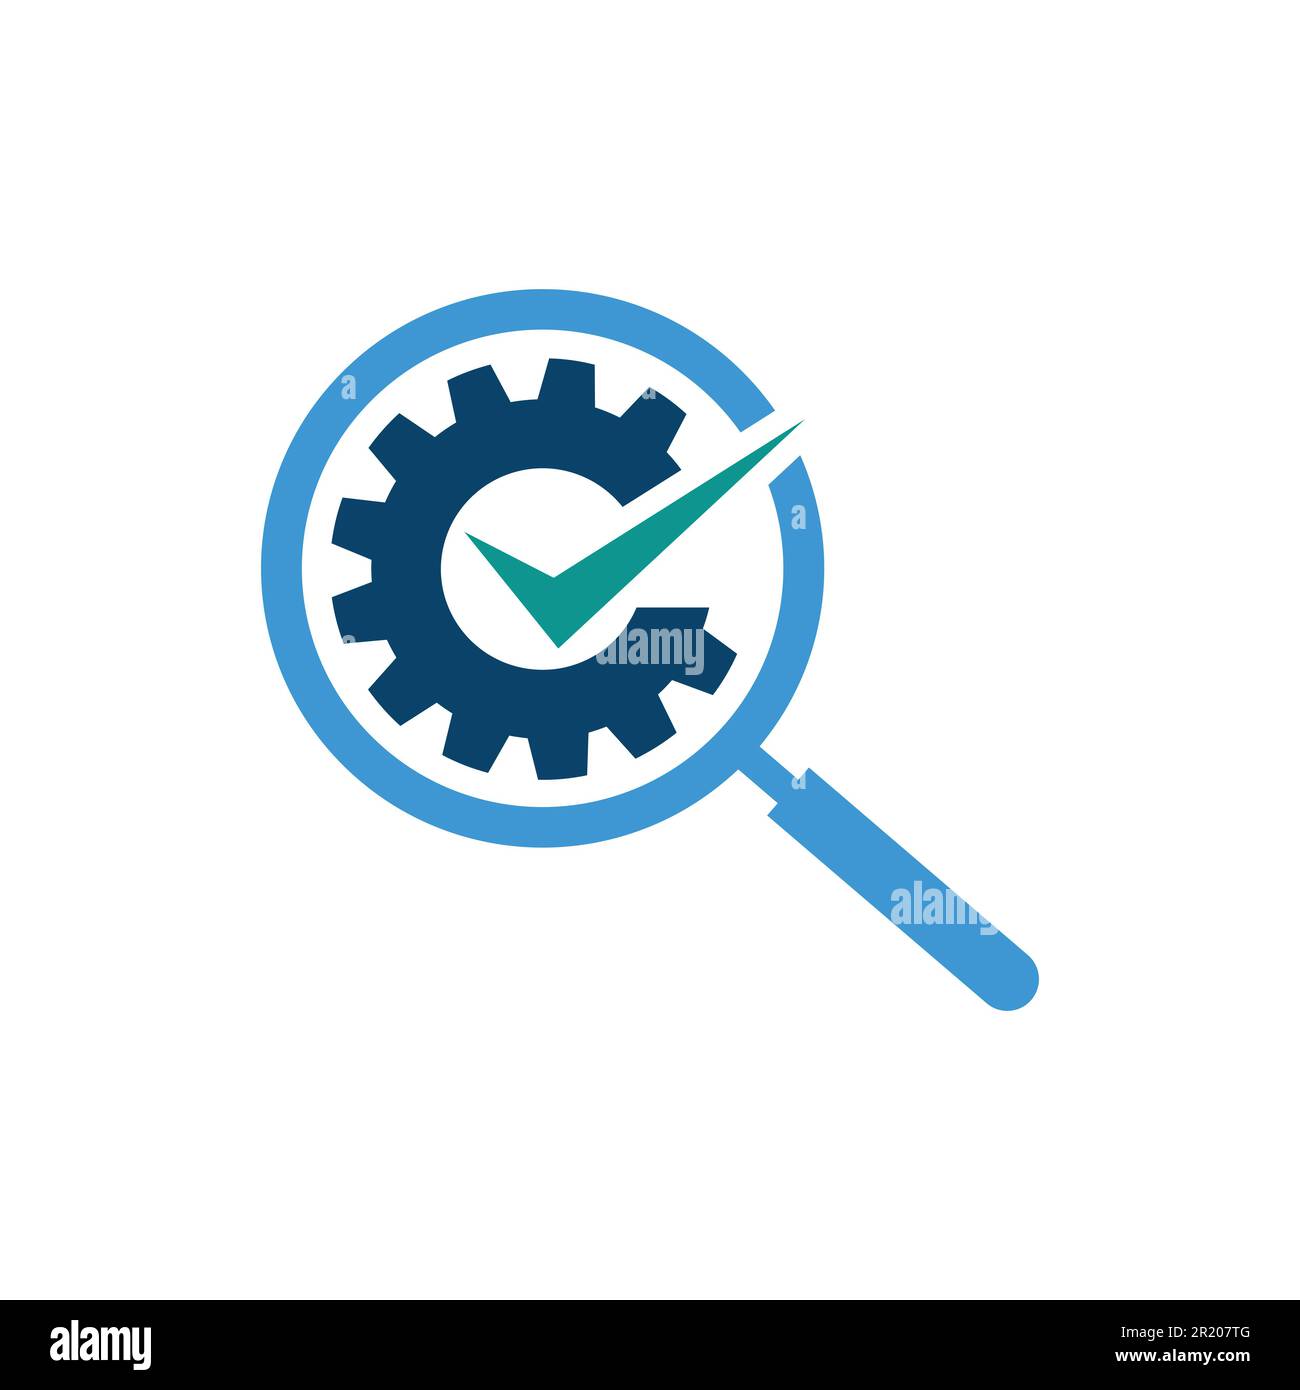 Check and magnifying glass gear shape logo design. icon of search glass search engine symbol with check mark for verified Stock Vector